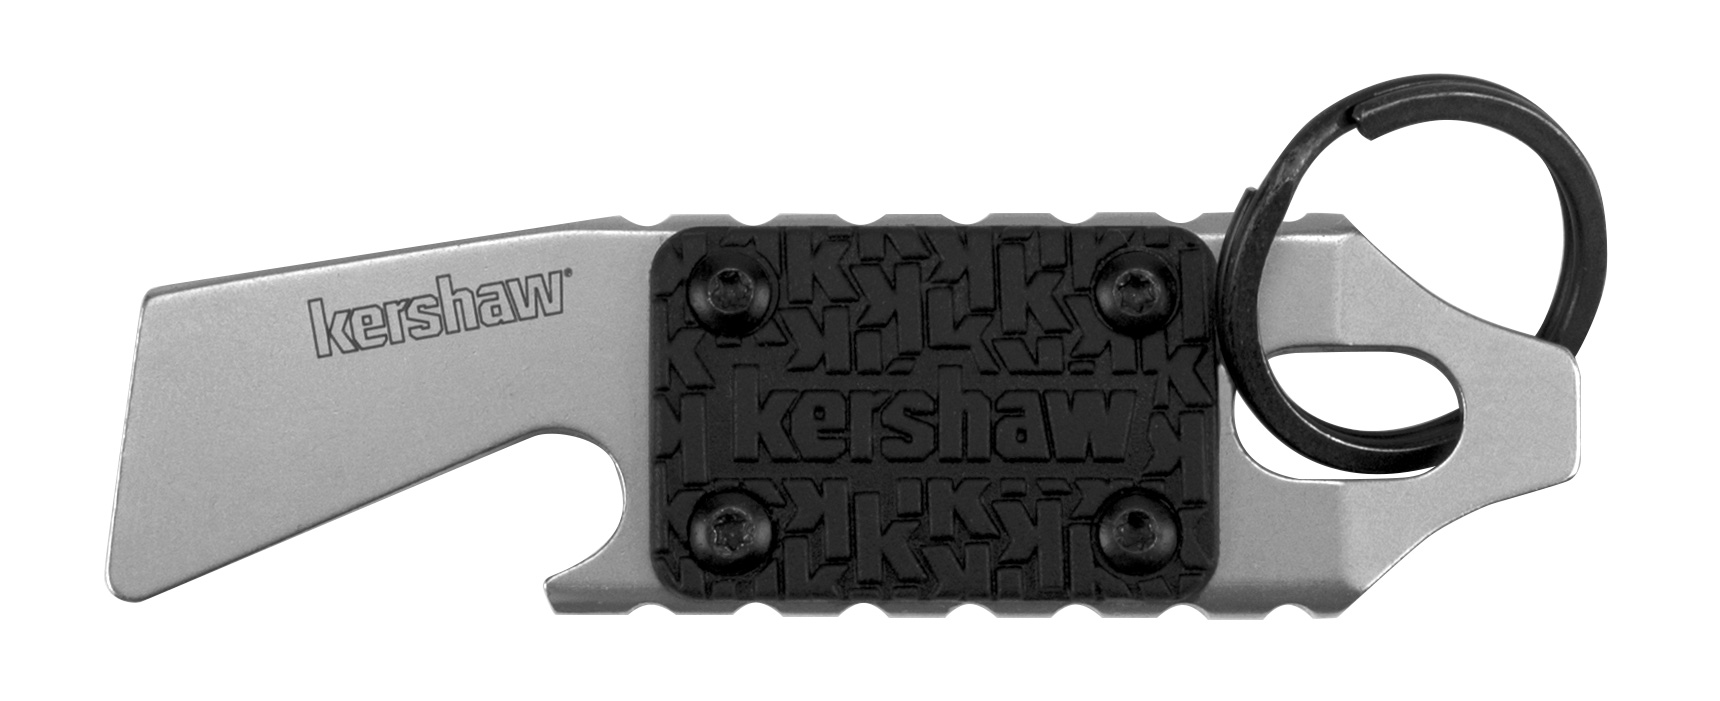 13%　PT-1　8800X　CampSaver　Off　Key　Kershaw　Tool　Chain　—